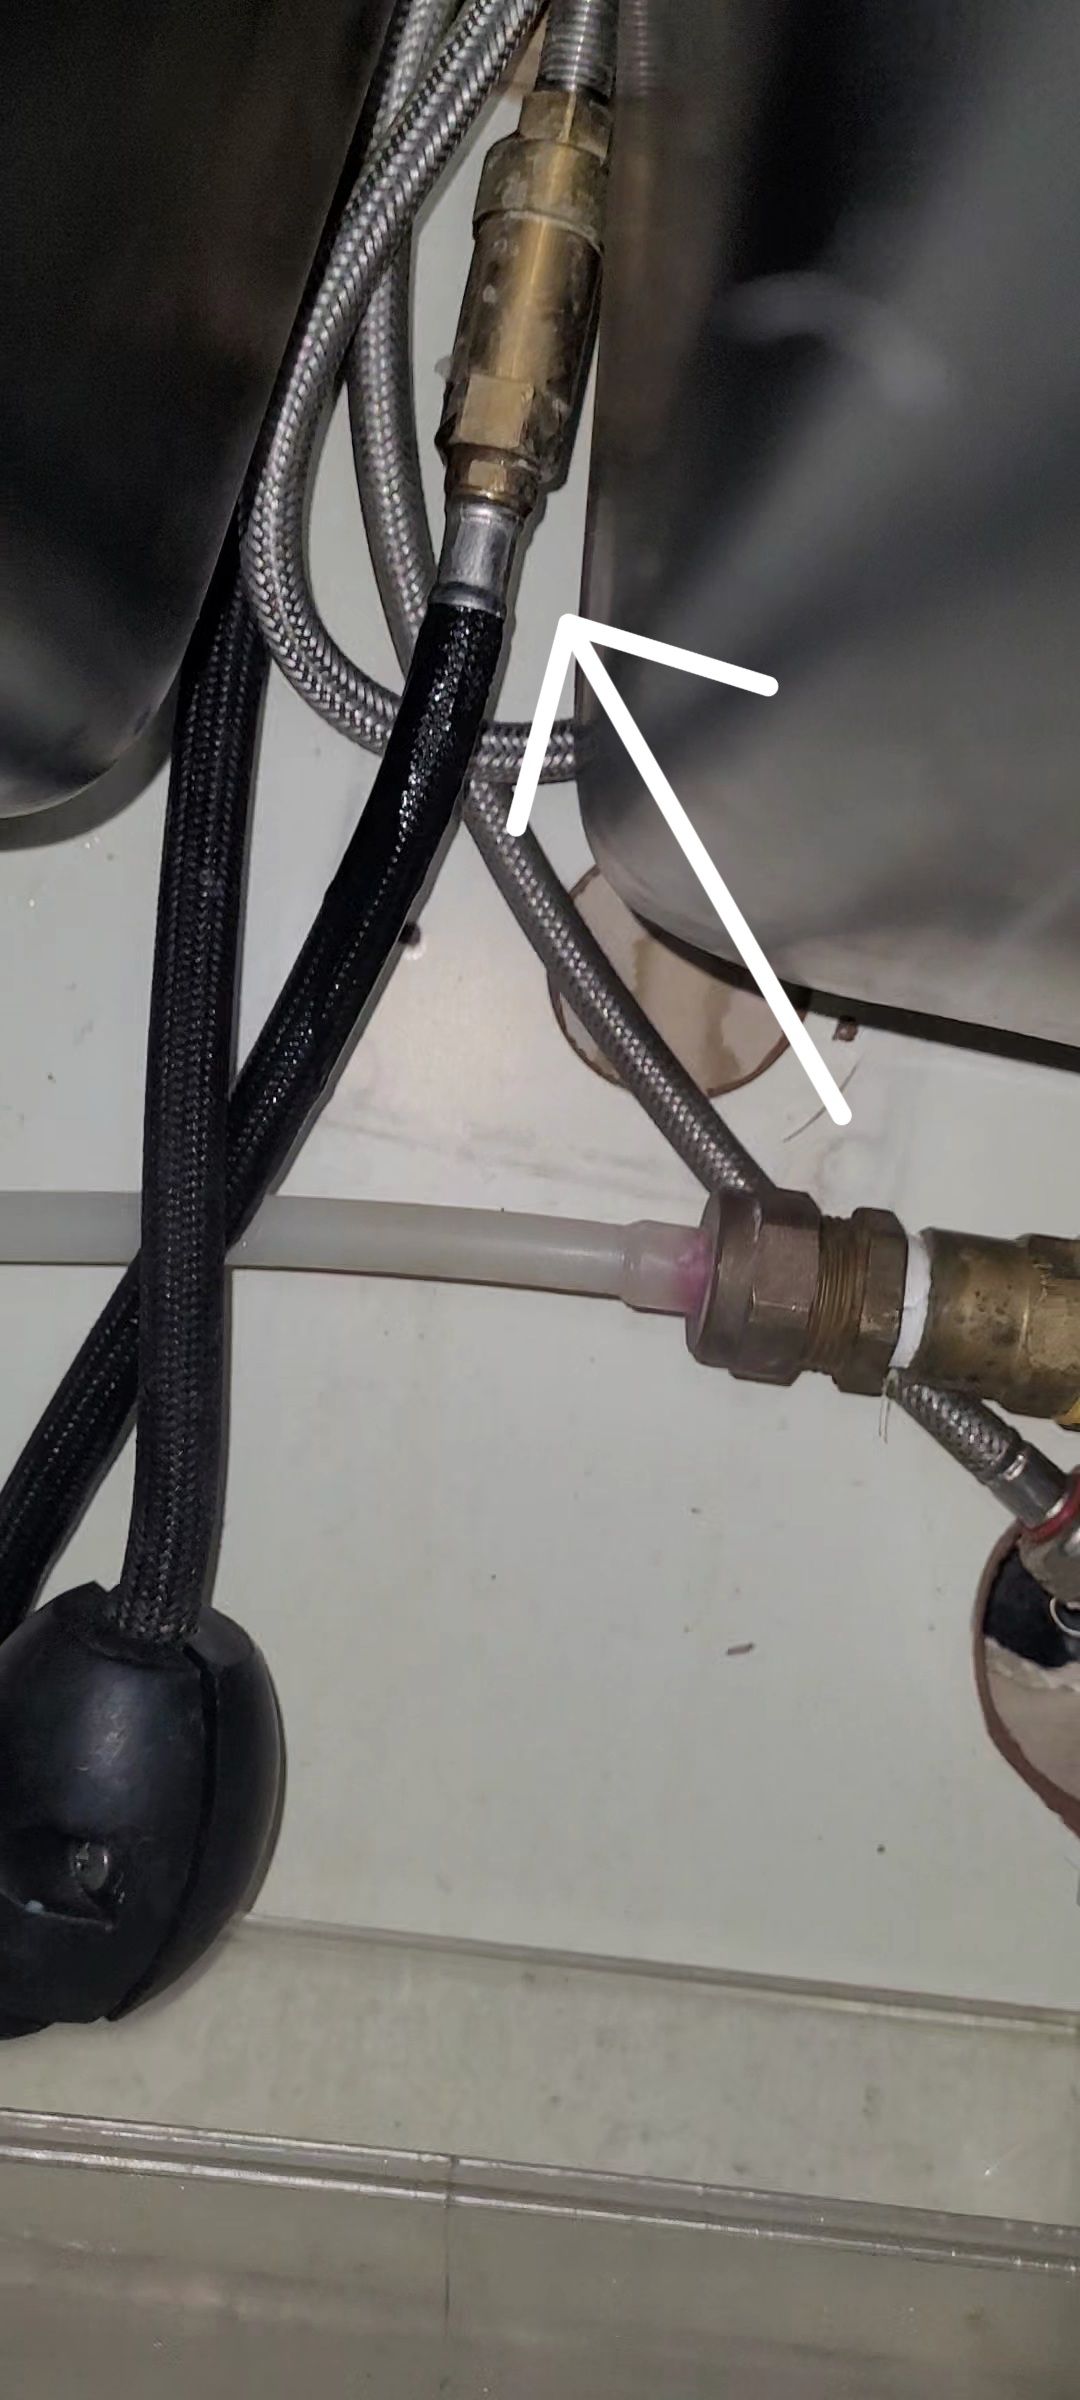 How to fix leaking mixer tap under the s... | Bunnings Workshop community